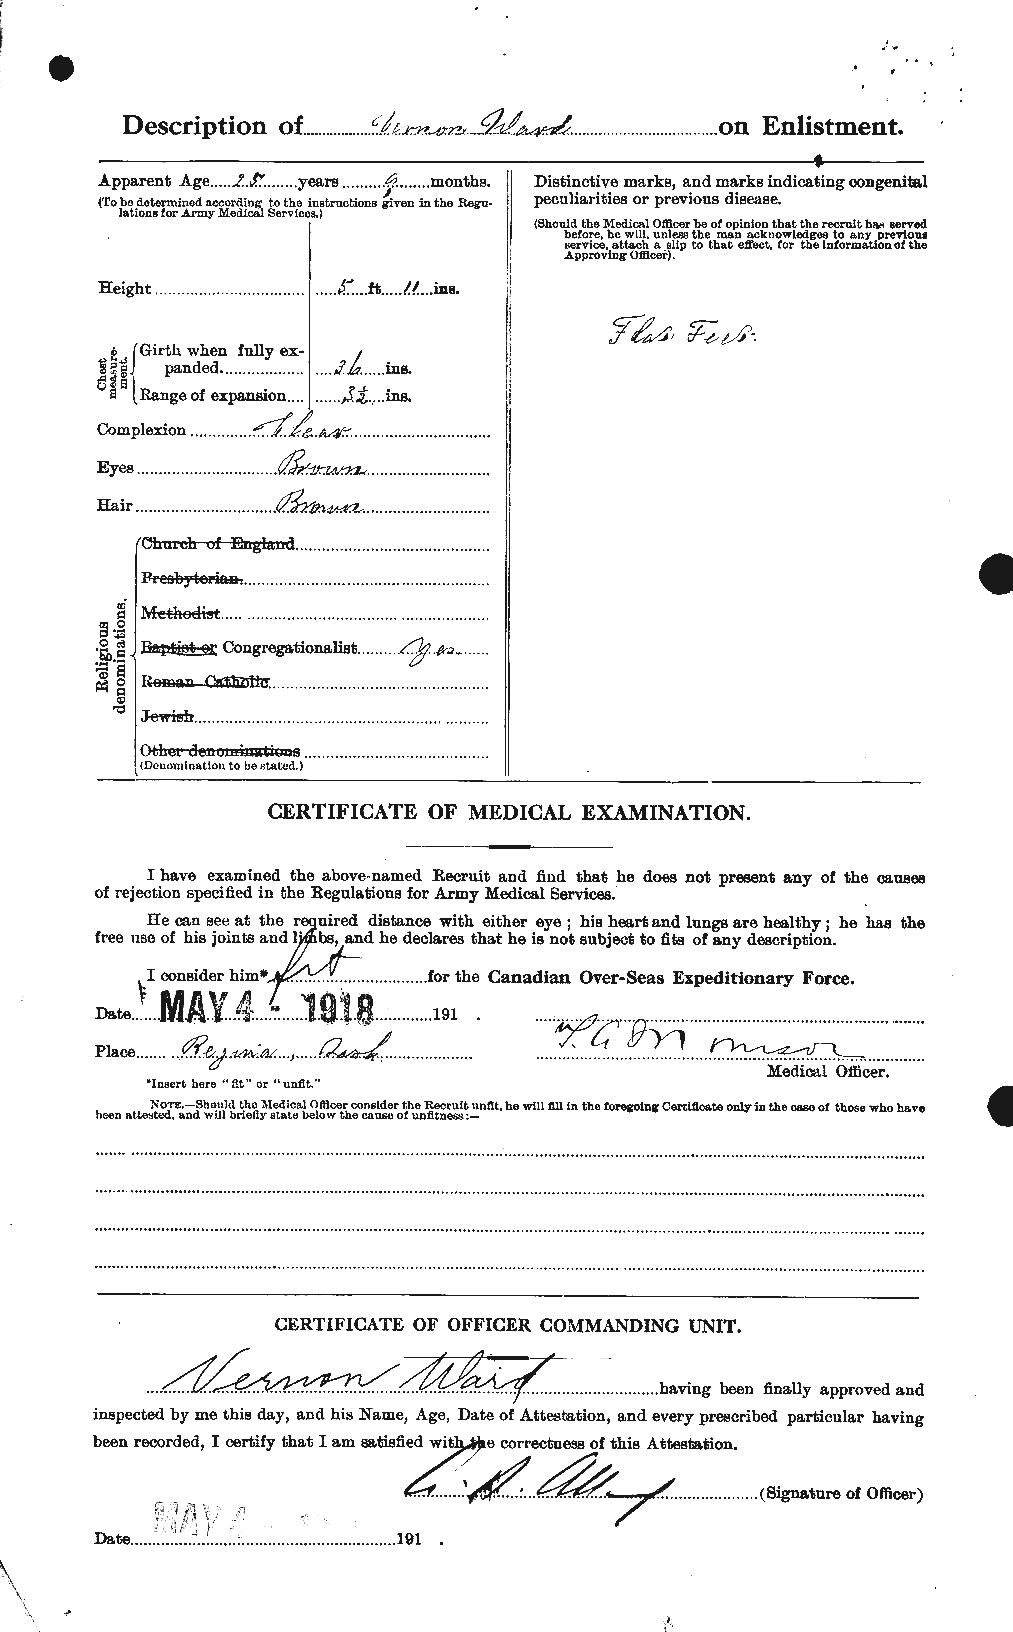 Personnel Records of the First World War - CEF 659743b